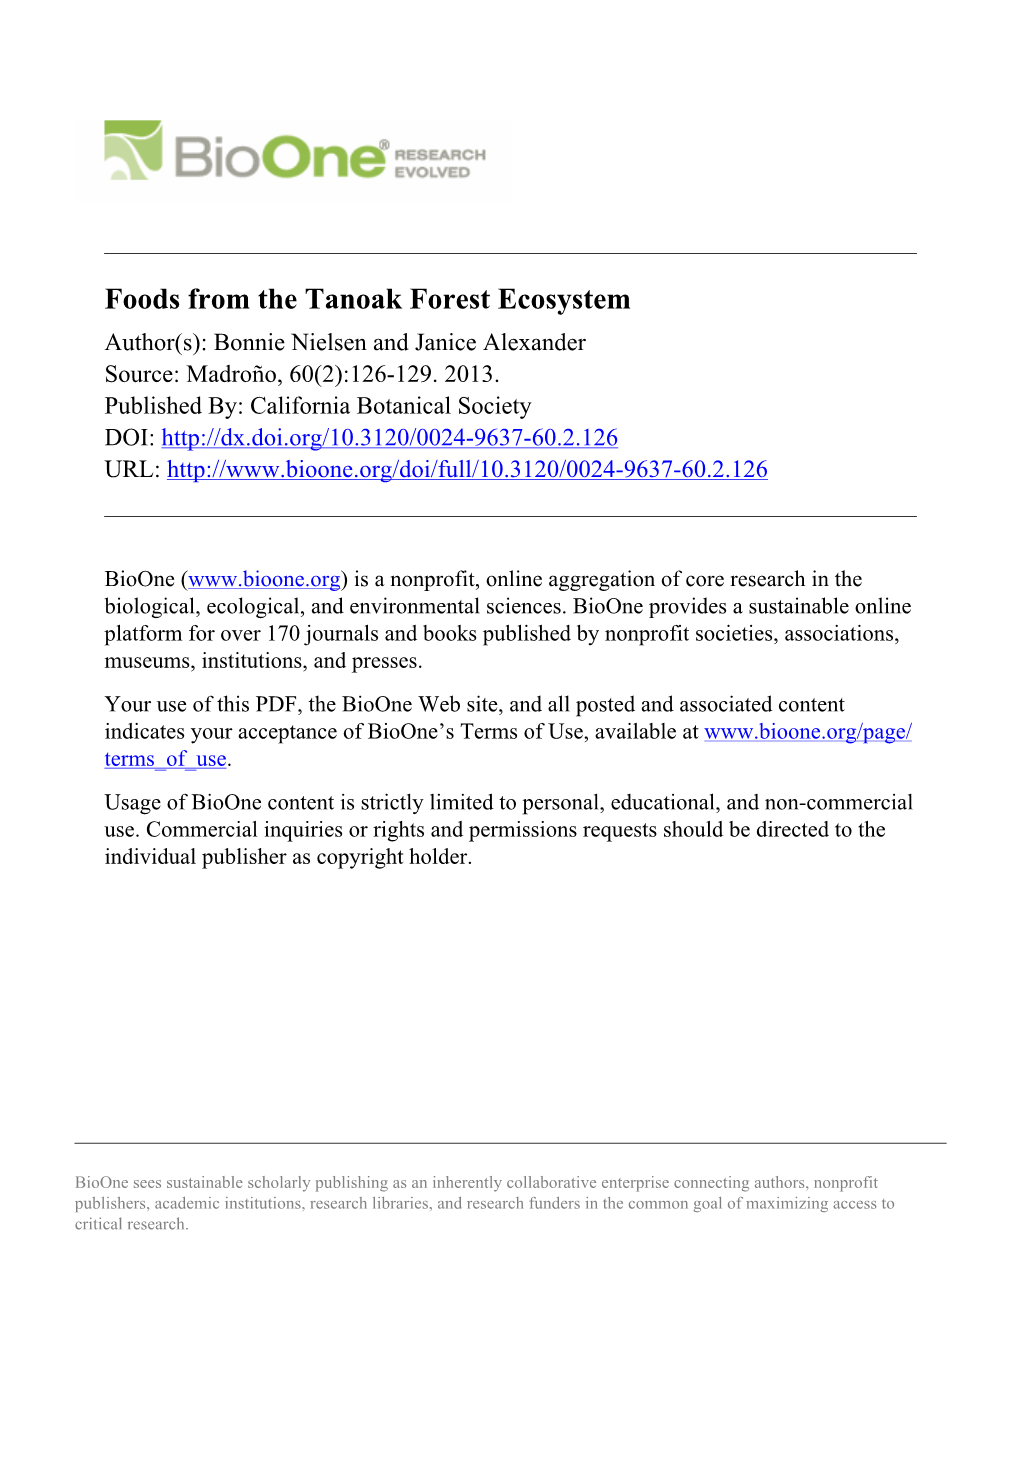 Foods from the Tanoak Forest Ecosystem Author(S): Bonnie Nielsen and Janice Alexander Source: Madroño, 60(2):126-129